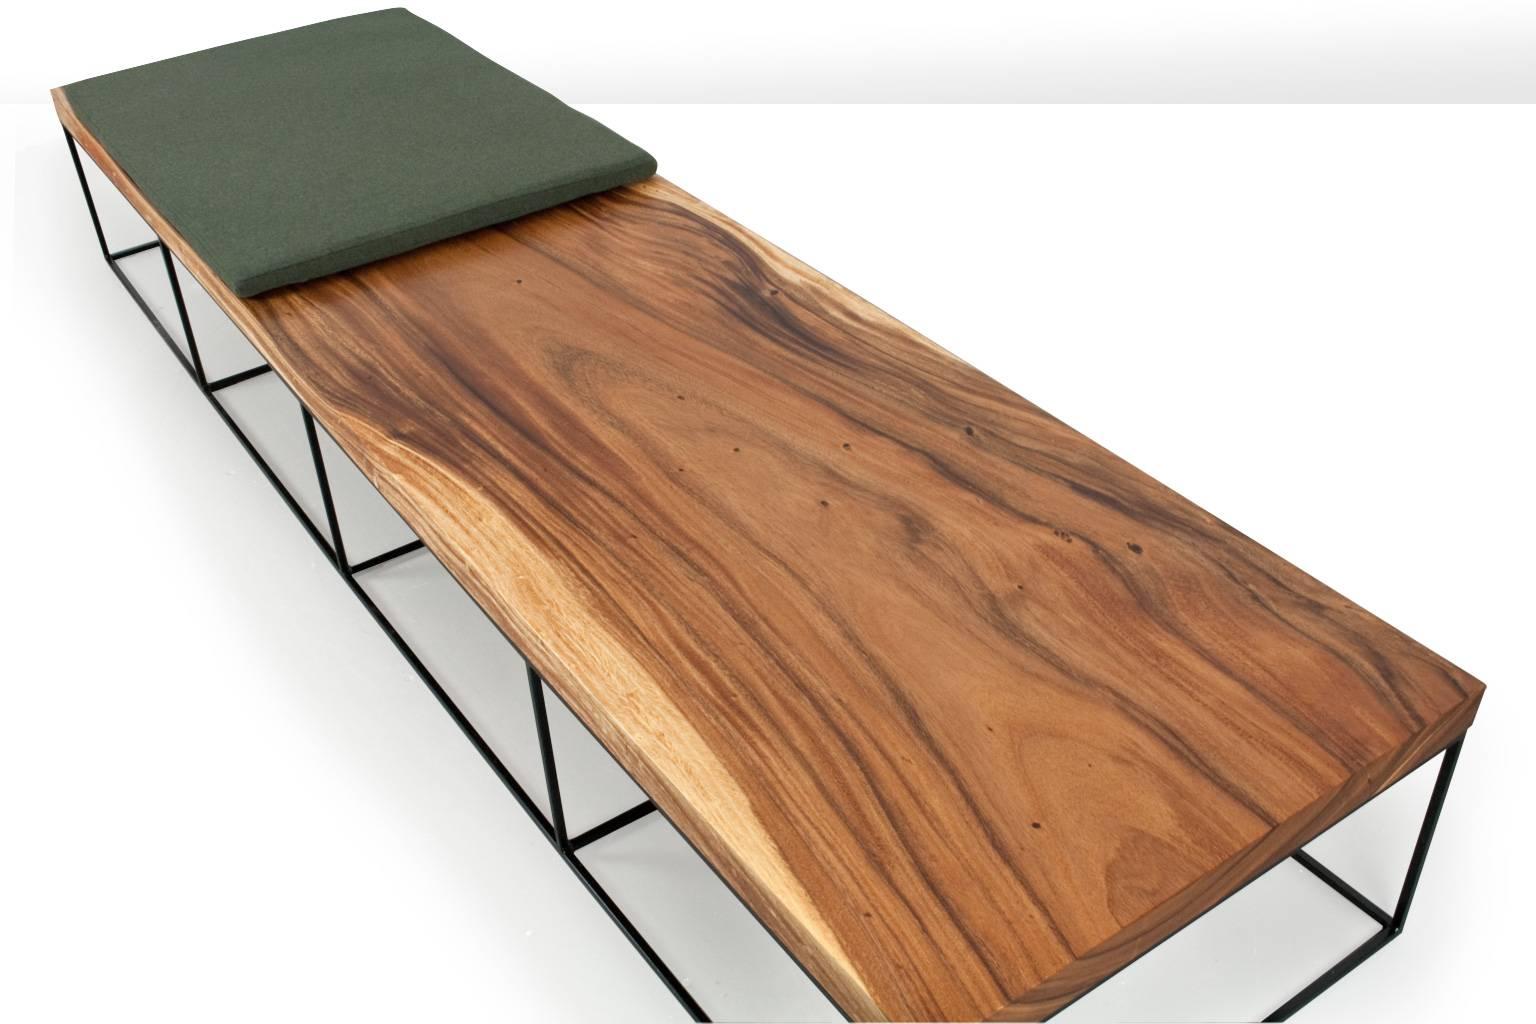 Indonesian Long Wooden Suar Coffee Table or Bench, Organic Contemporary Modern Design For Sale